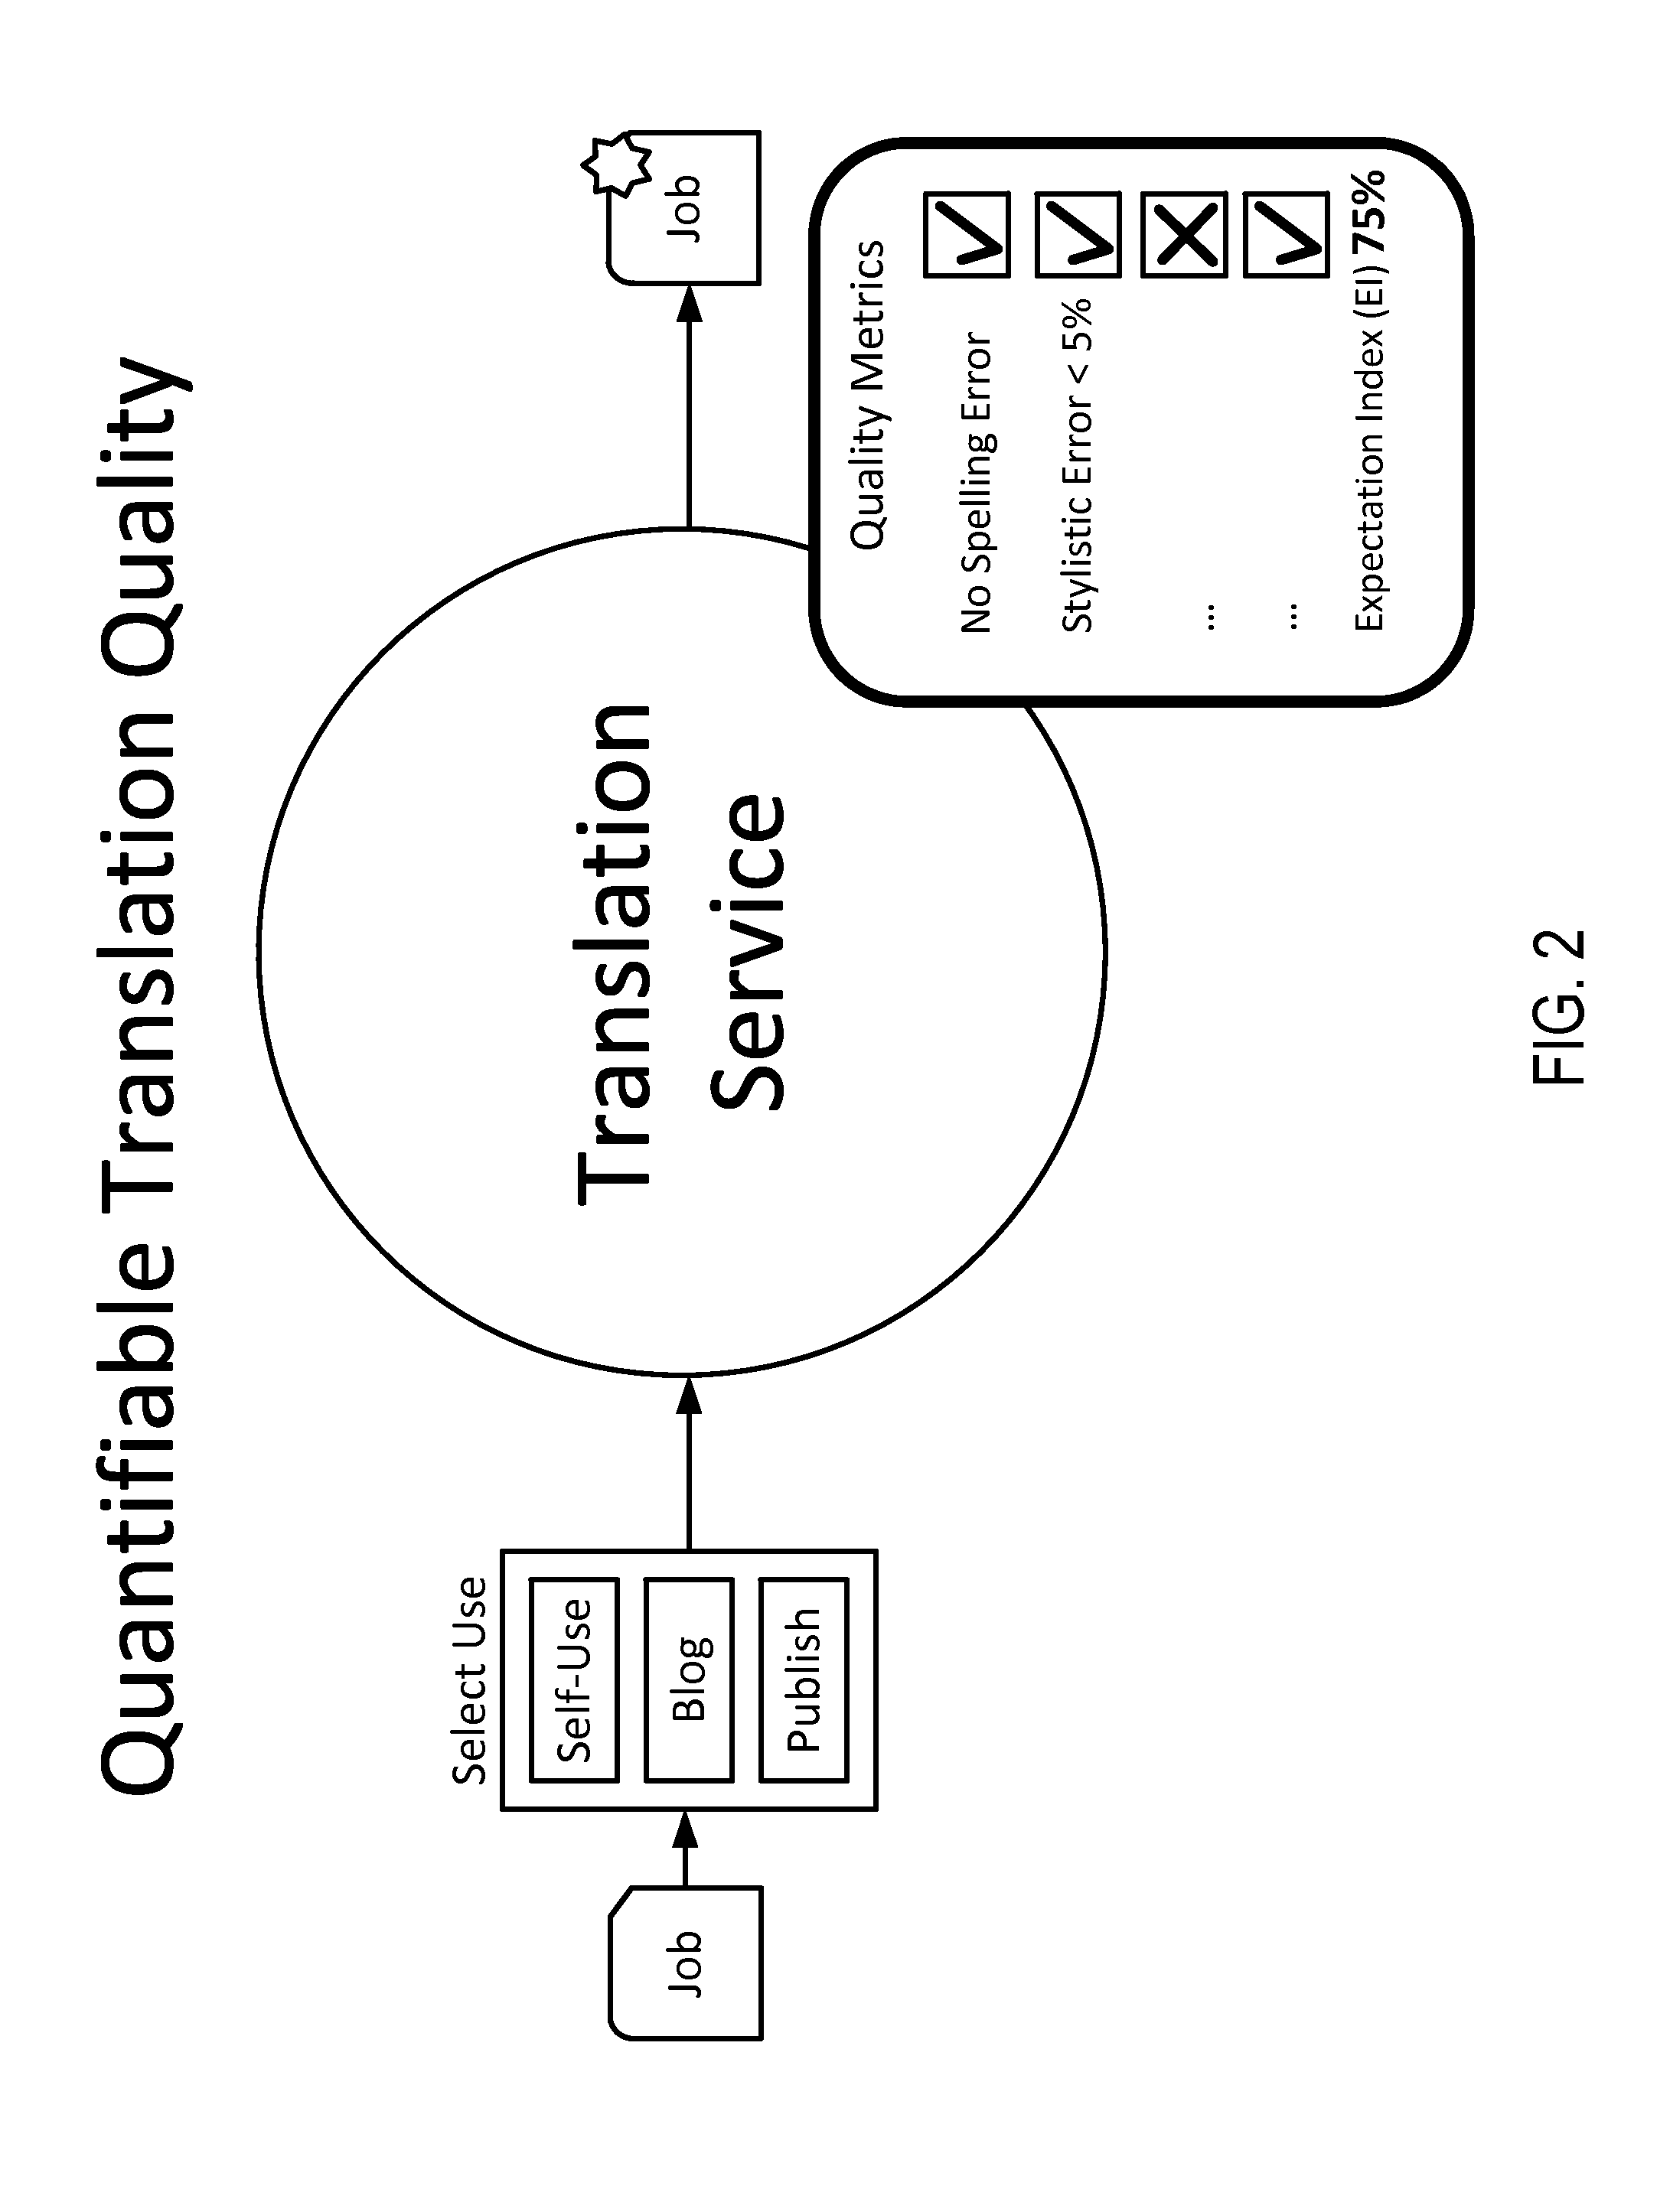 Systems and methods to control work progress for content transformation based on natural language processing and/or machine learning